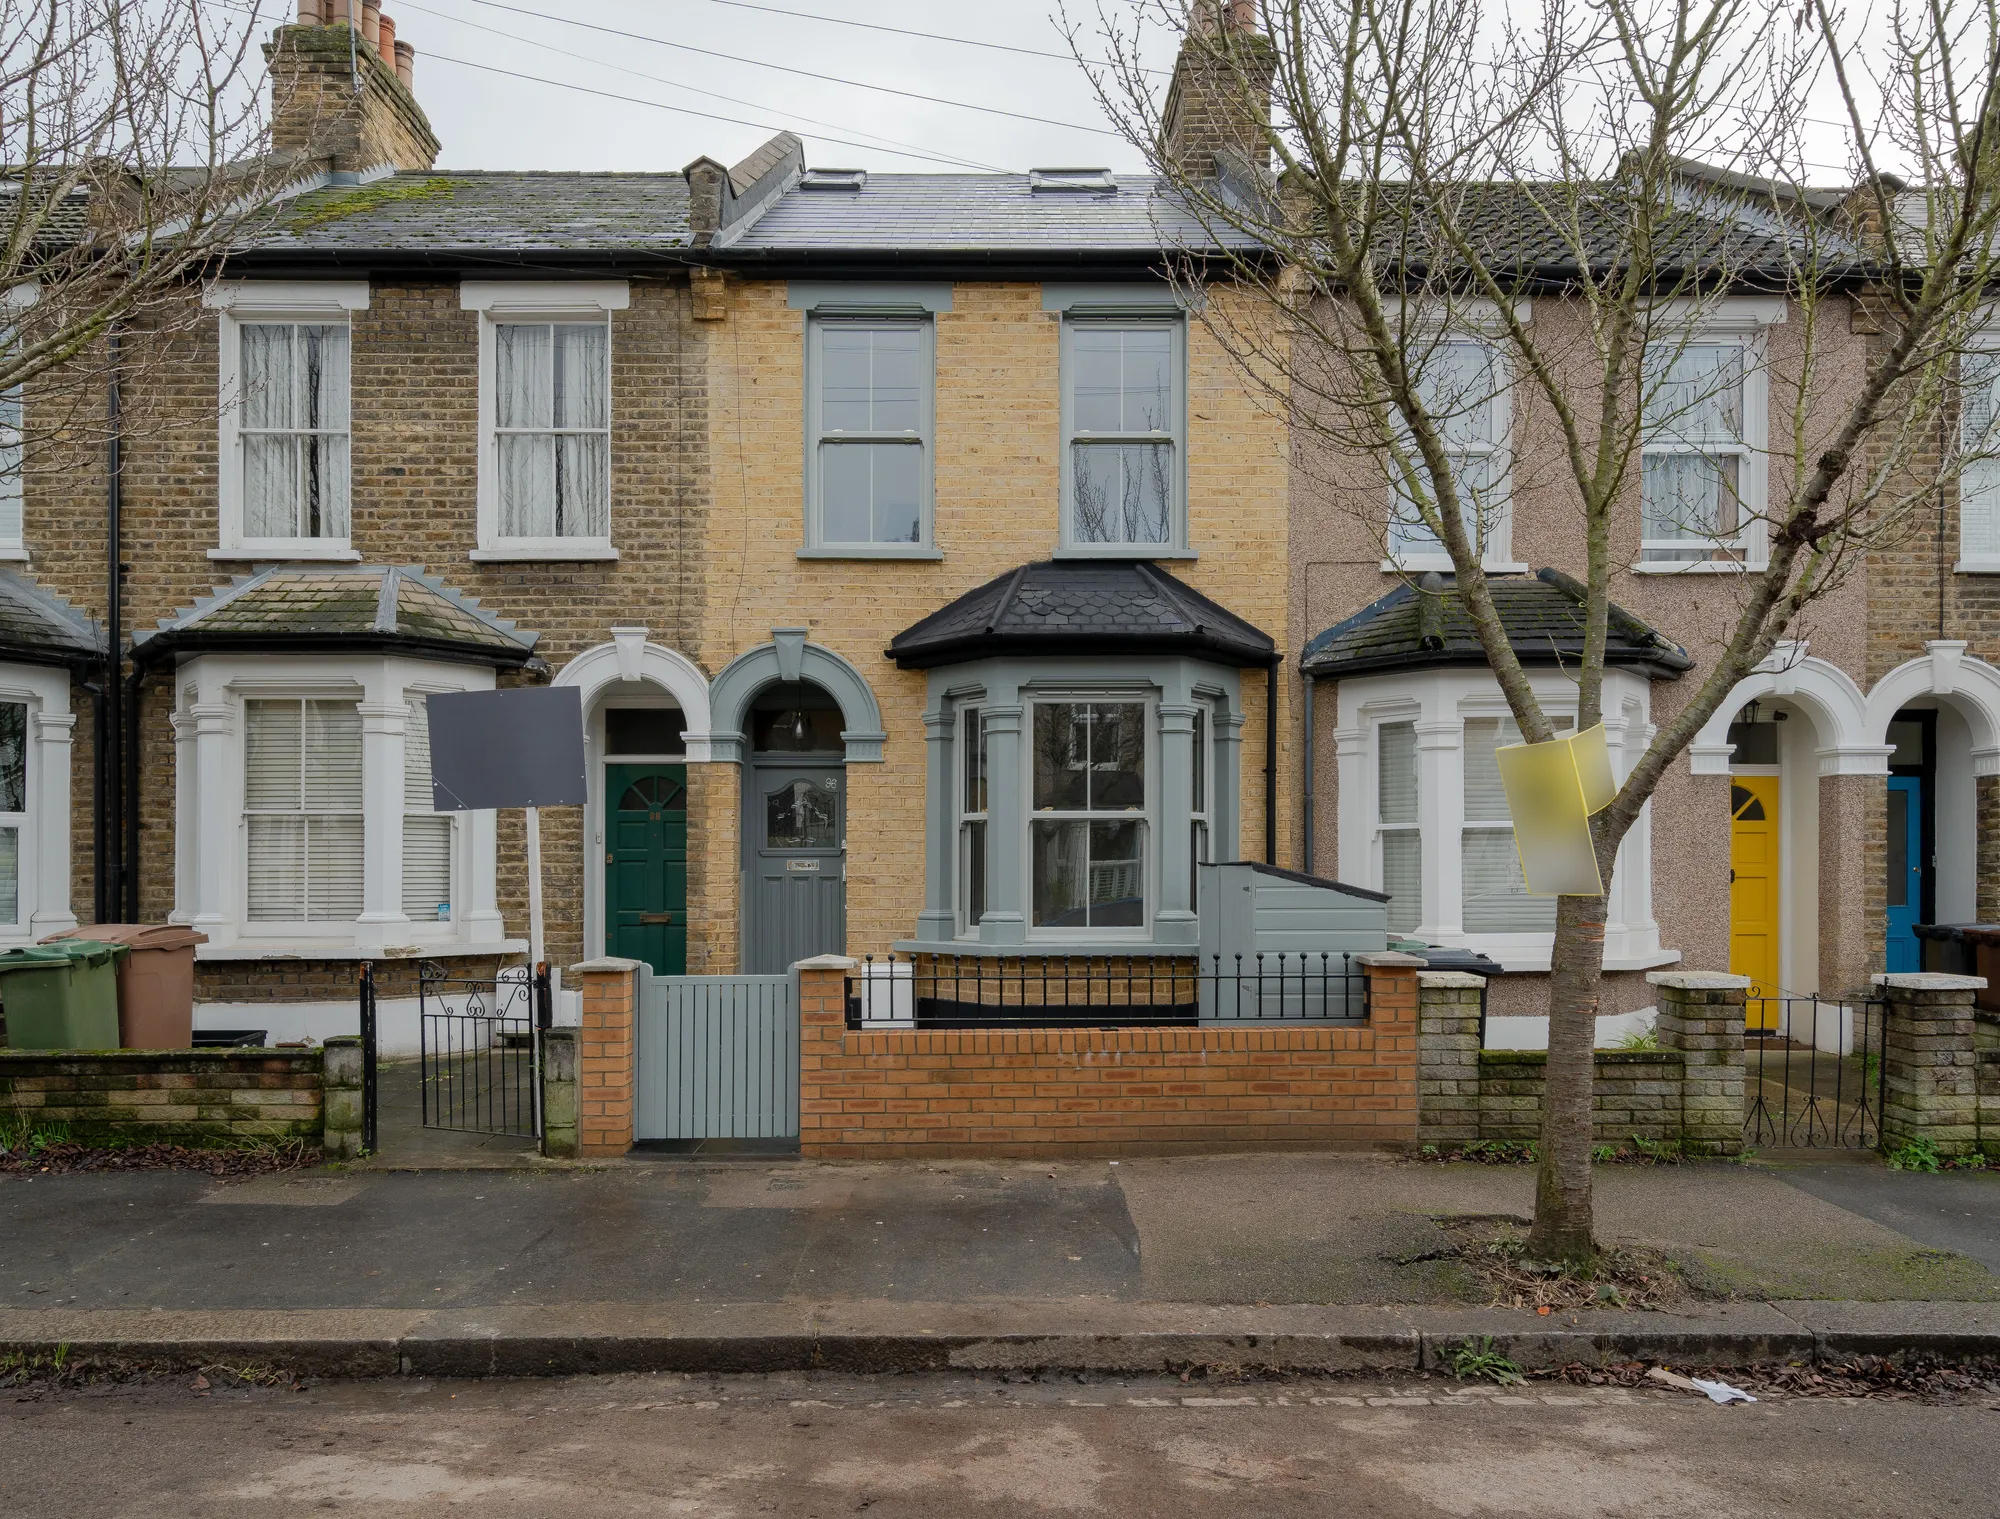 4 bed mid-terraced house for sale in Farmer Road, Leyton - Property Image 1